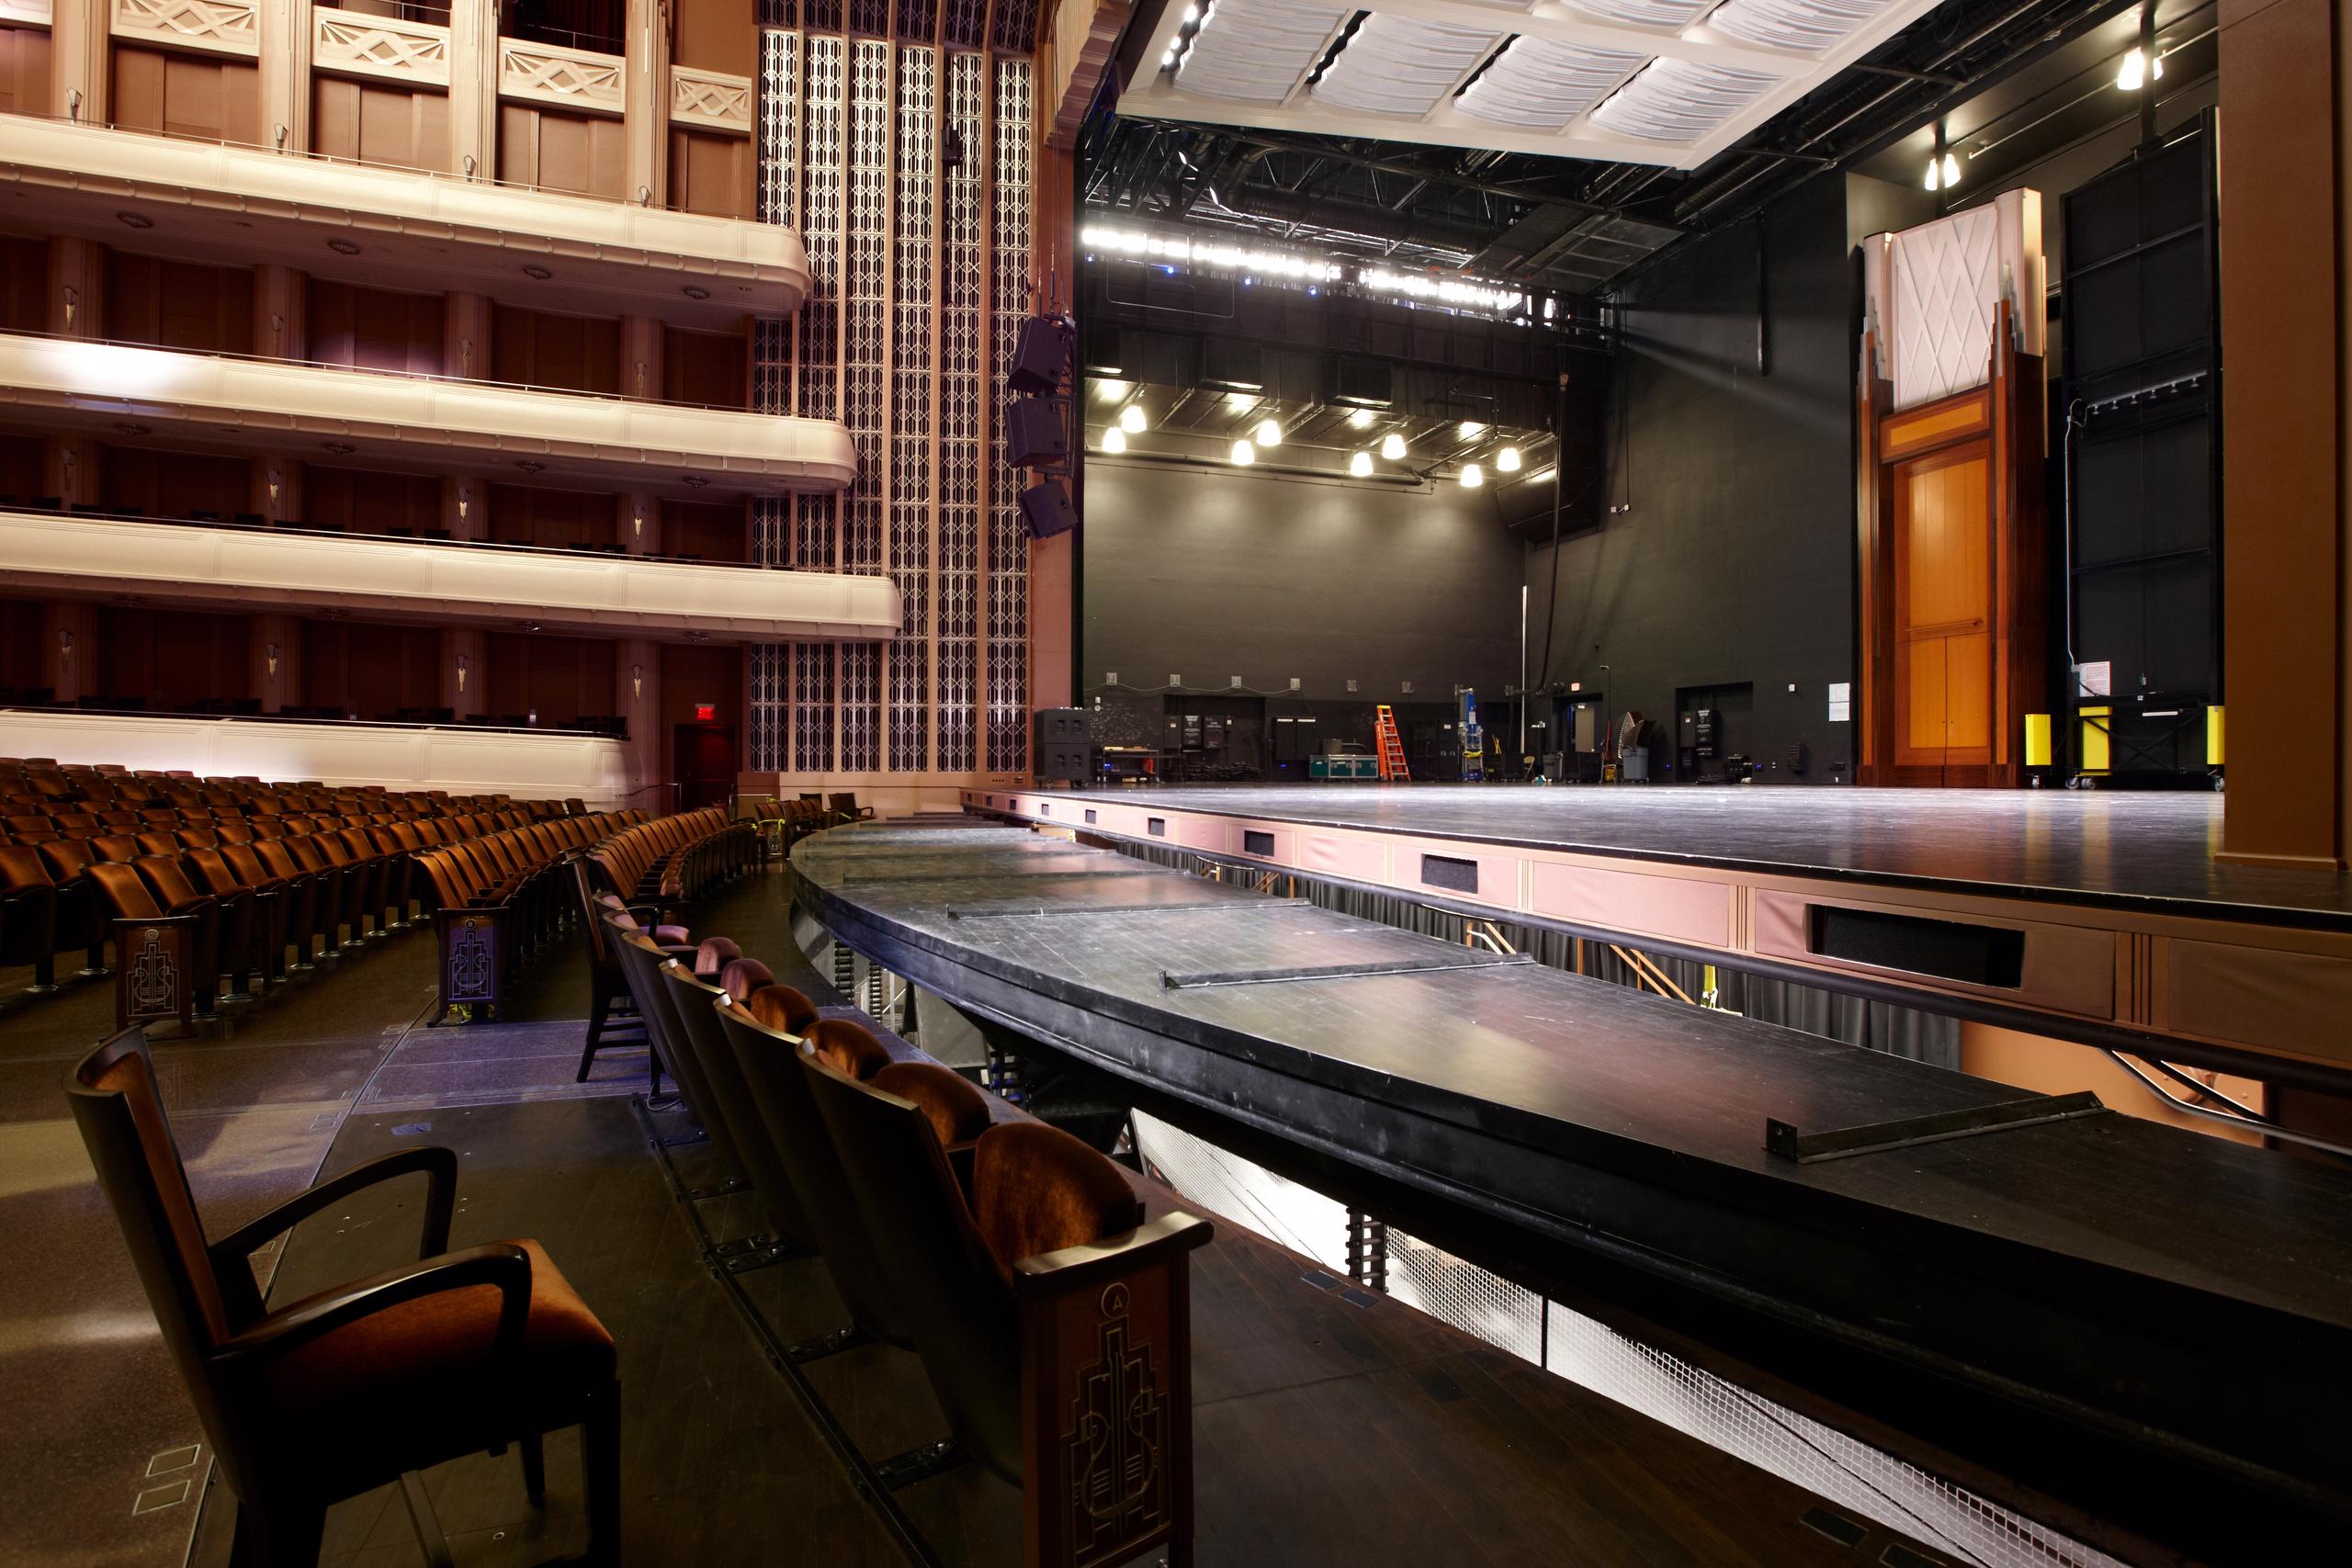 SMITH CENTER FOR THE PERFORMING ARTS - Project Image 2